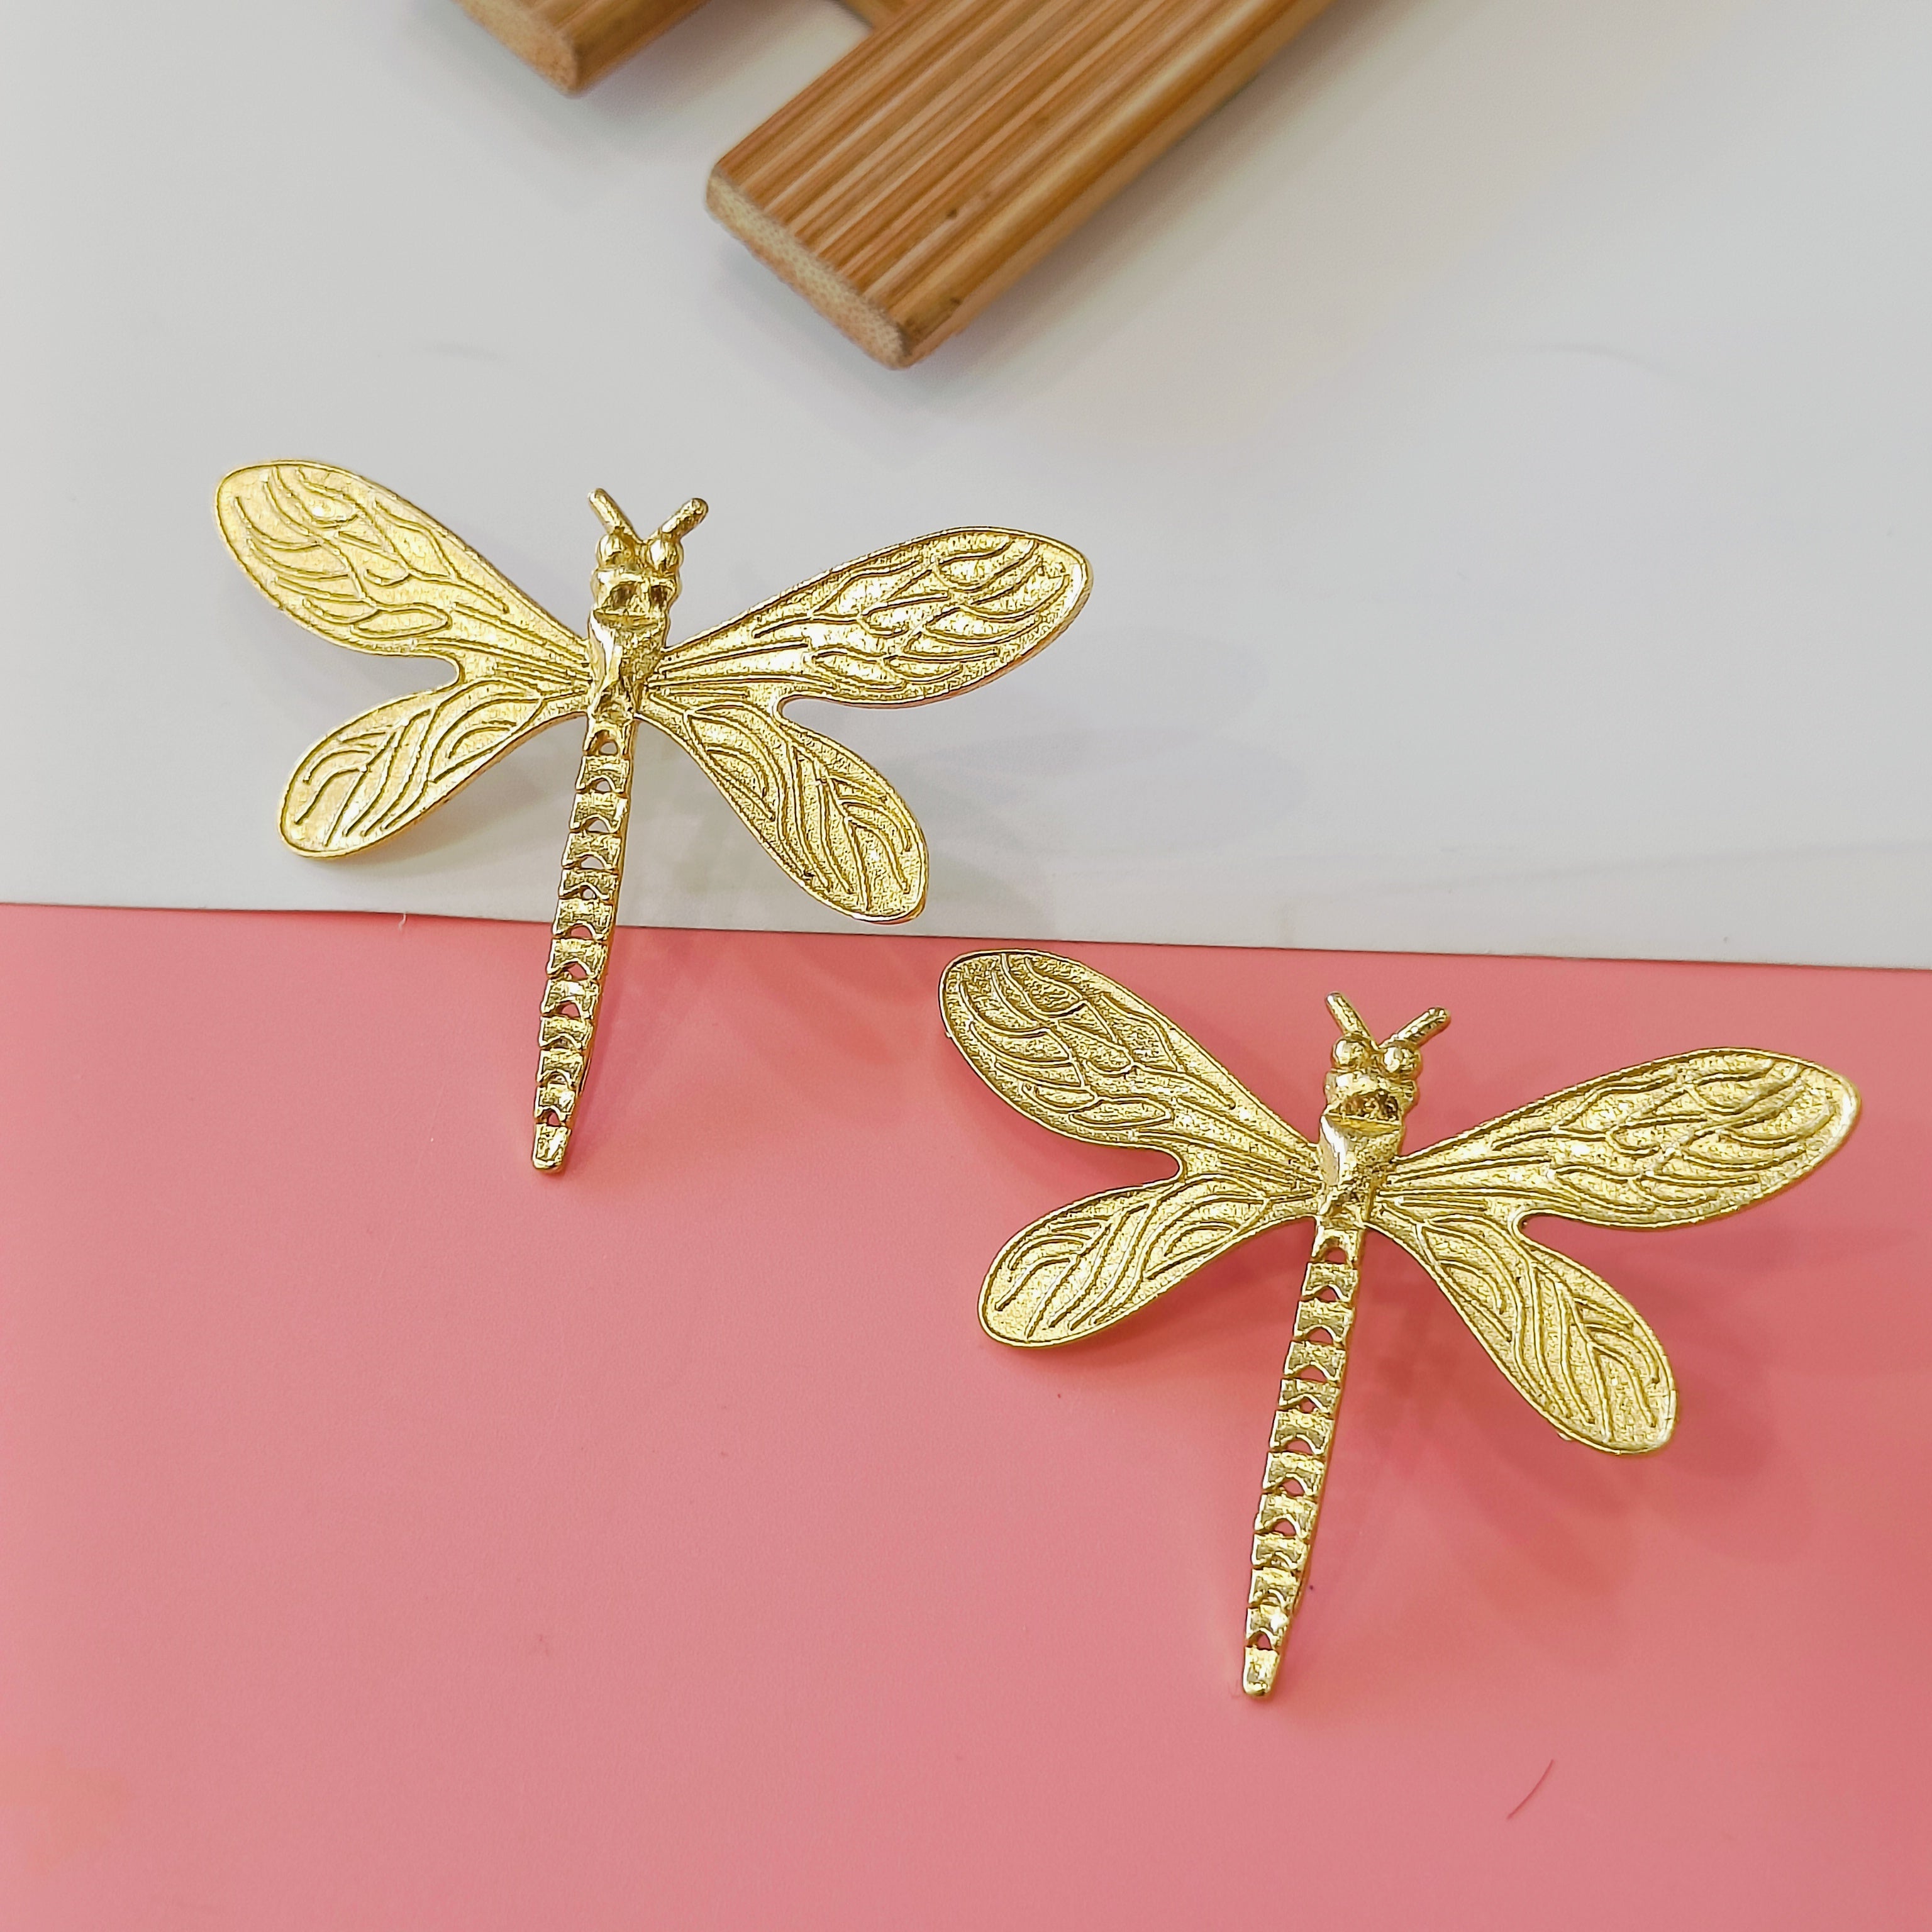 Layla Dolly earrings with Hair pin